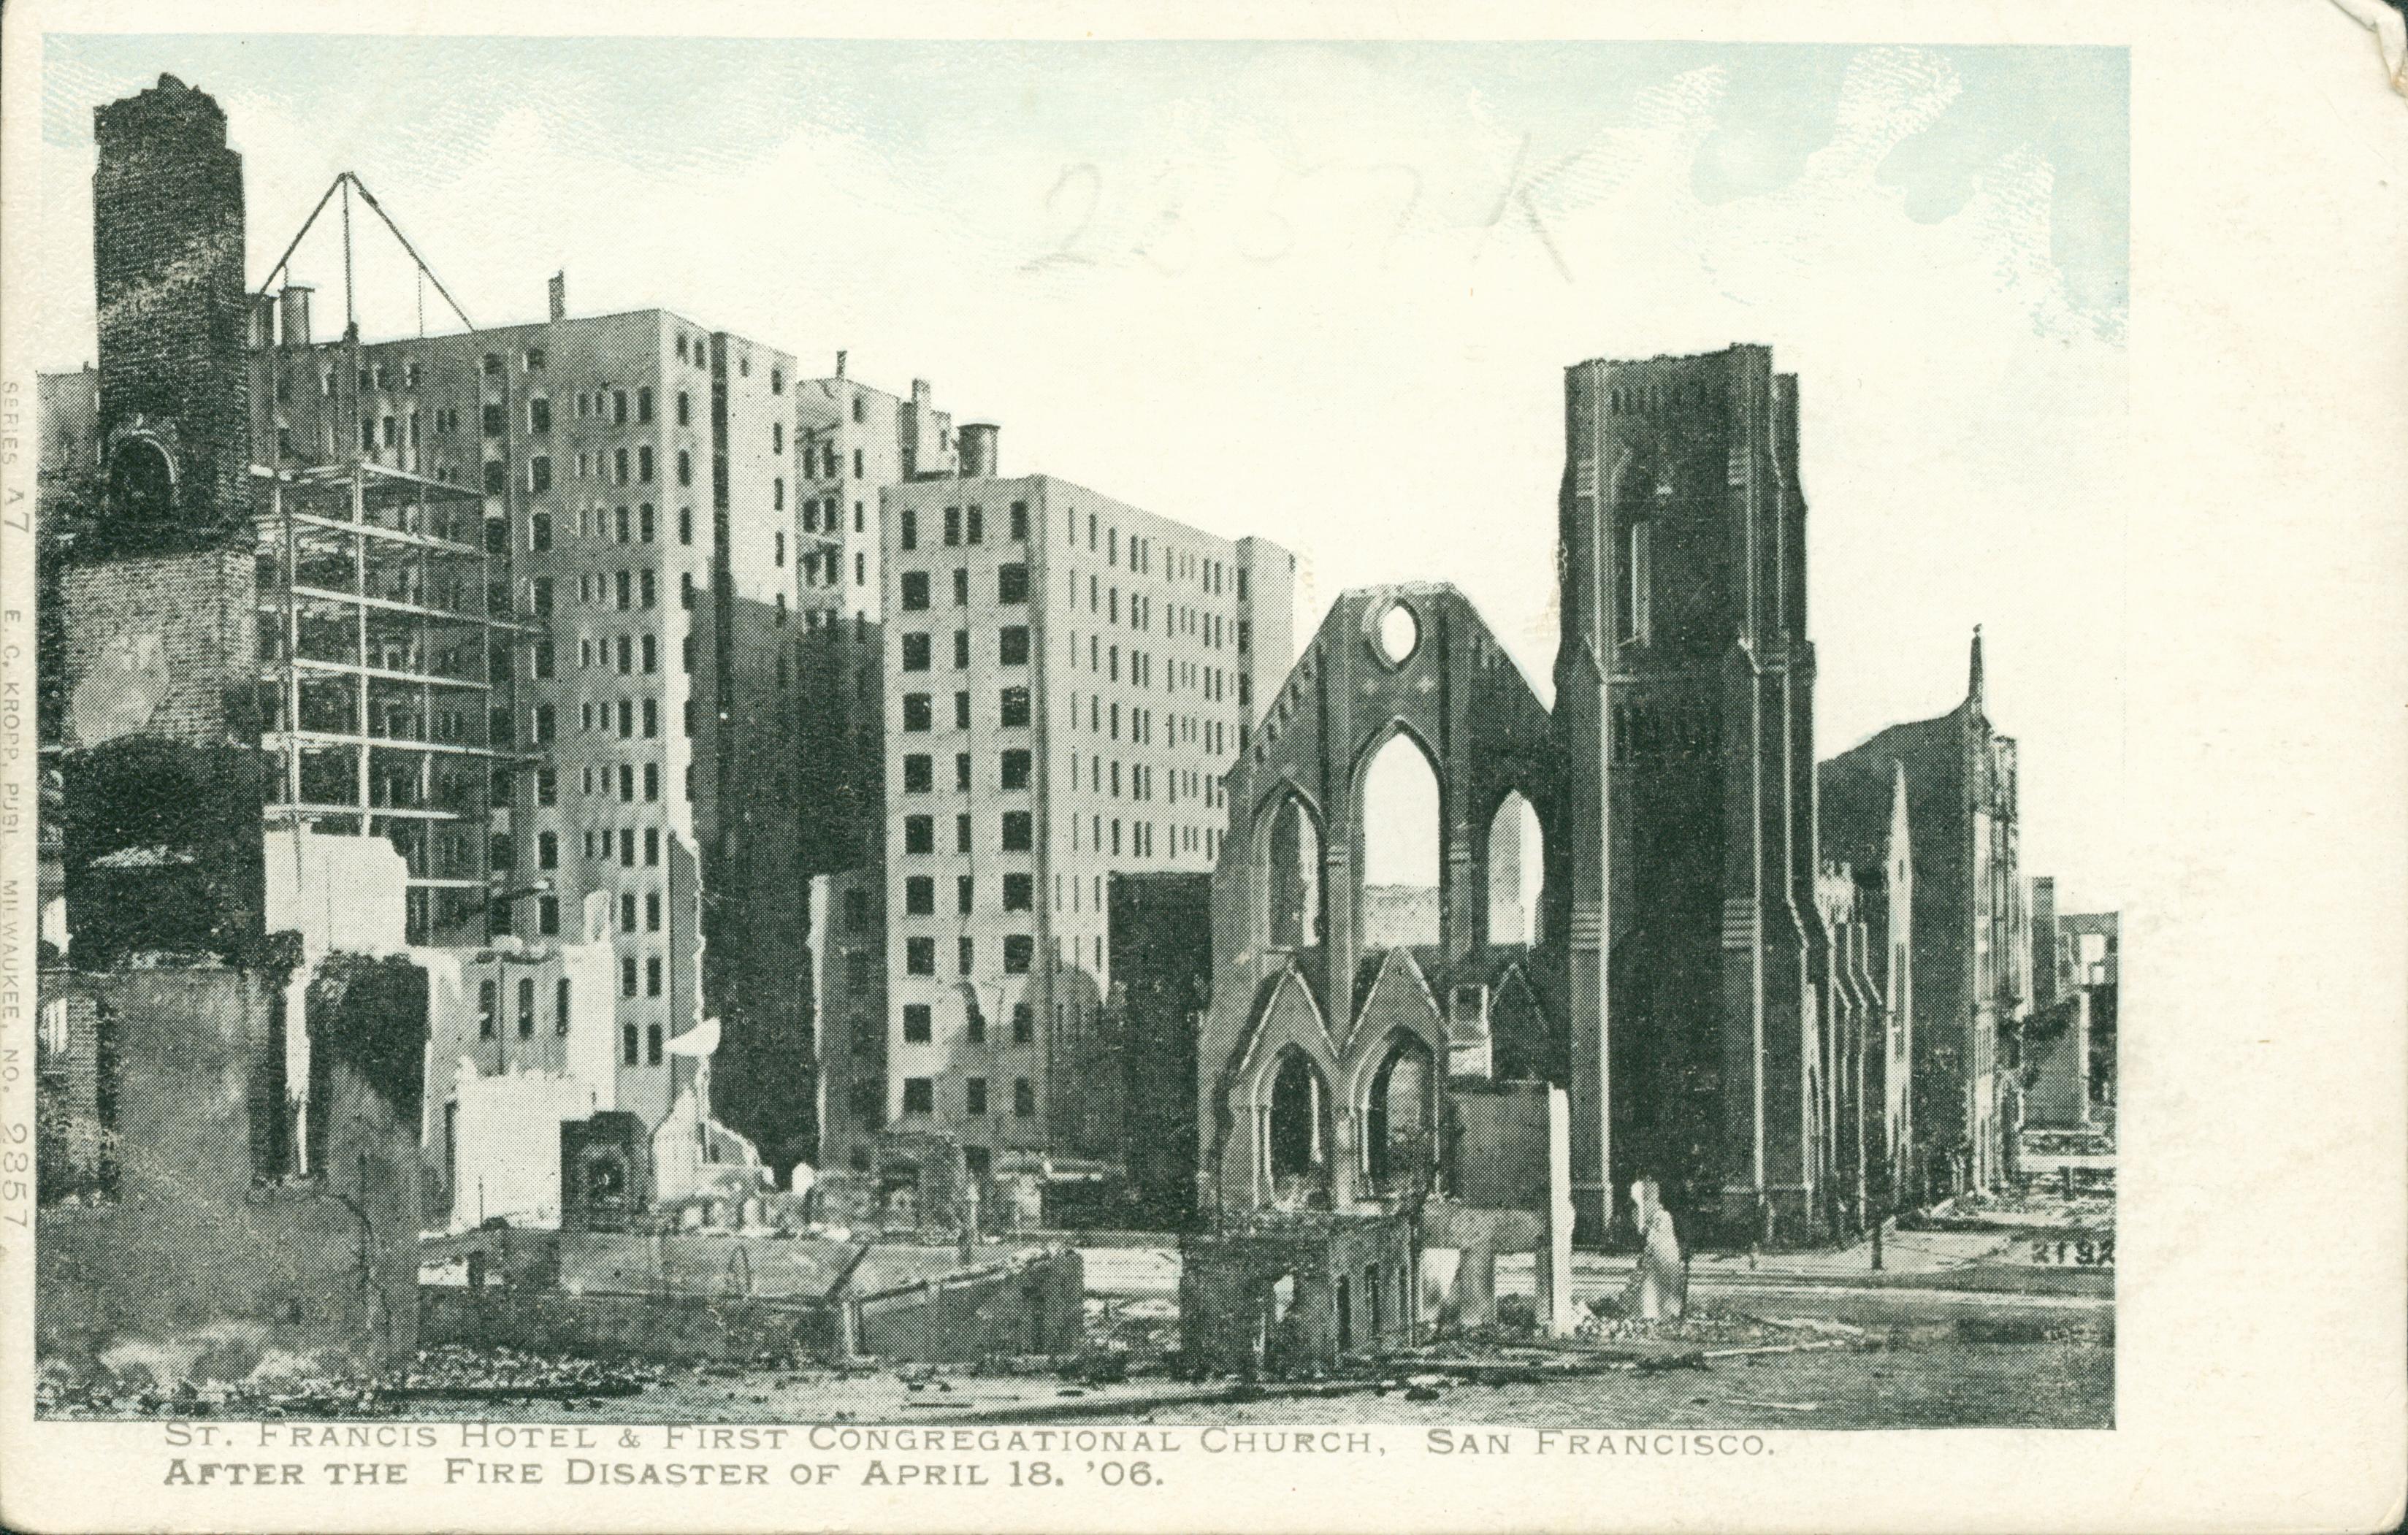 Shows the destruction of the St. Francis Hotel and First Congregational Church, San Francisco.